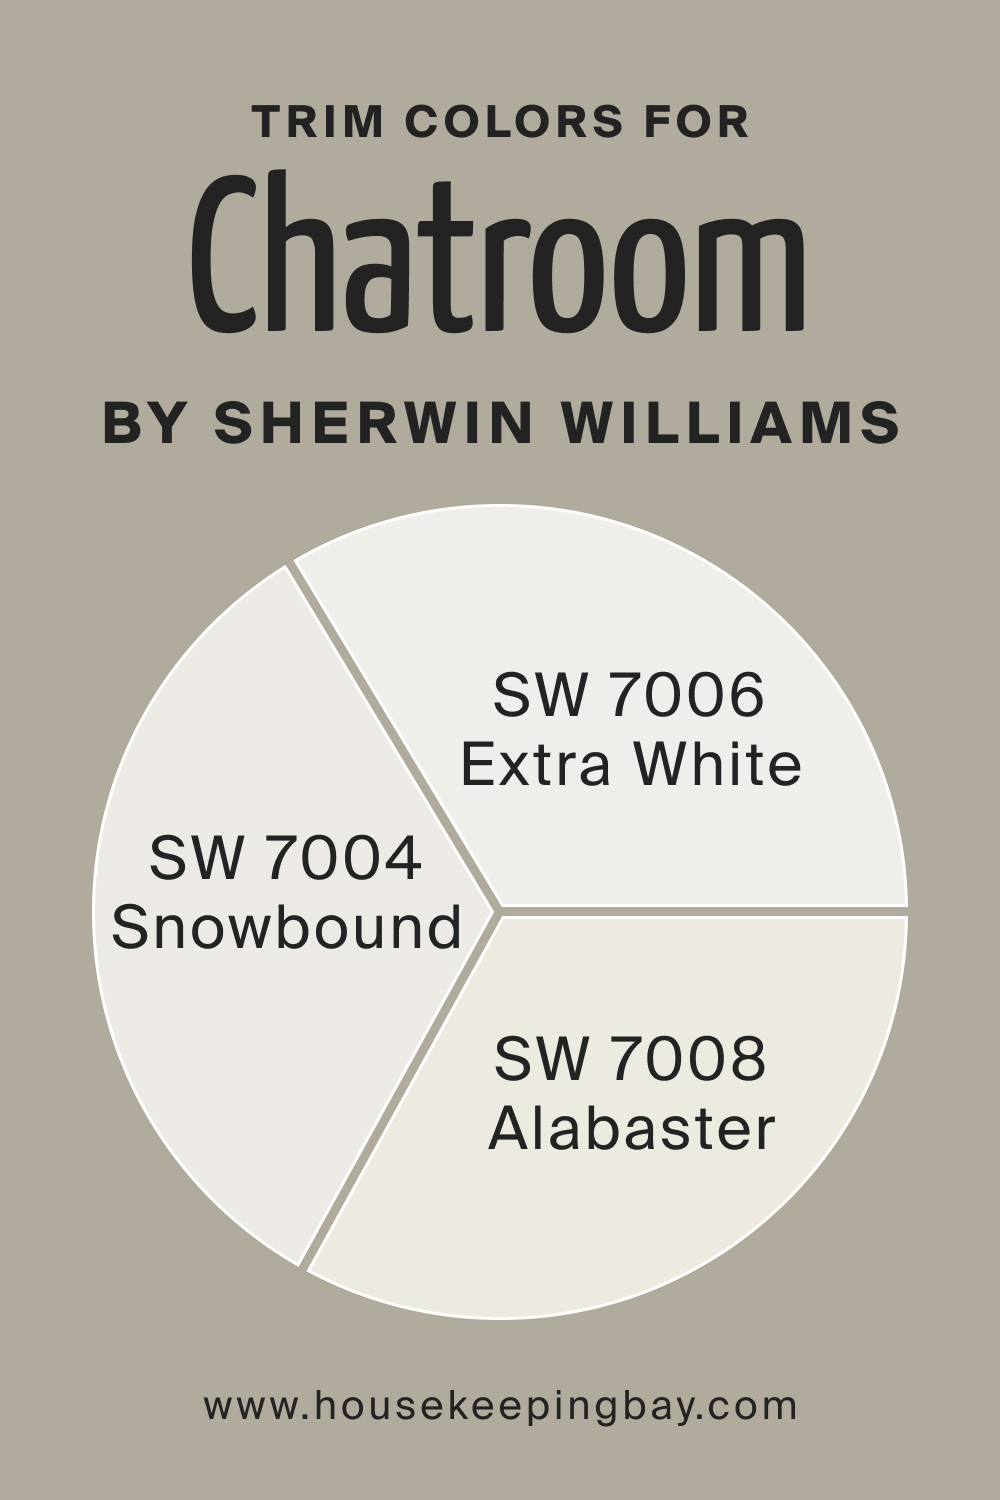 Trim Colors of SW 6171 Chatroom by Sherwin Williams